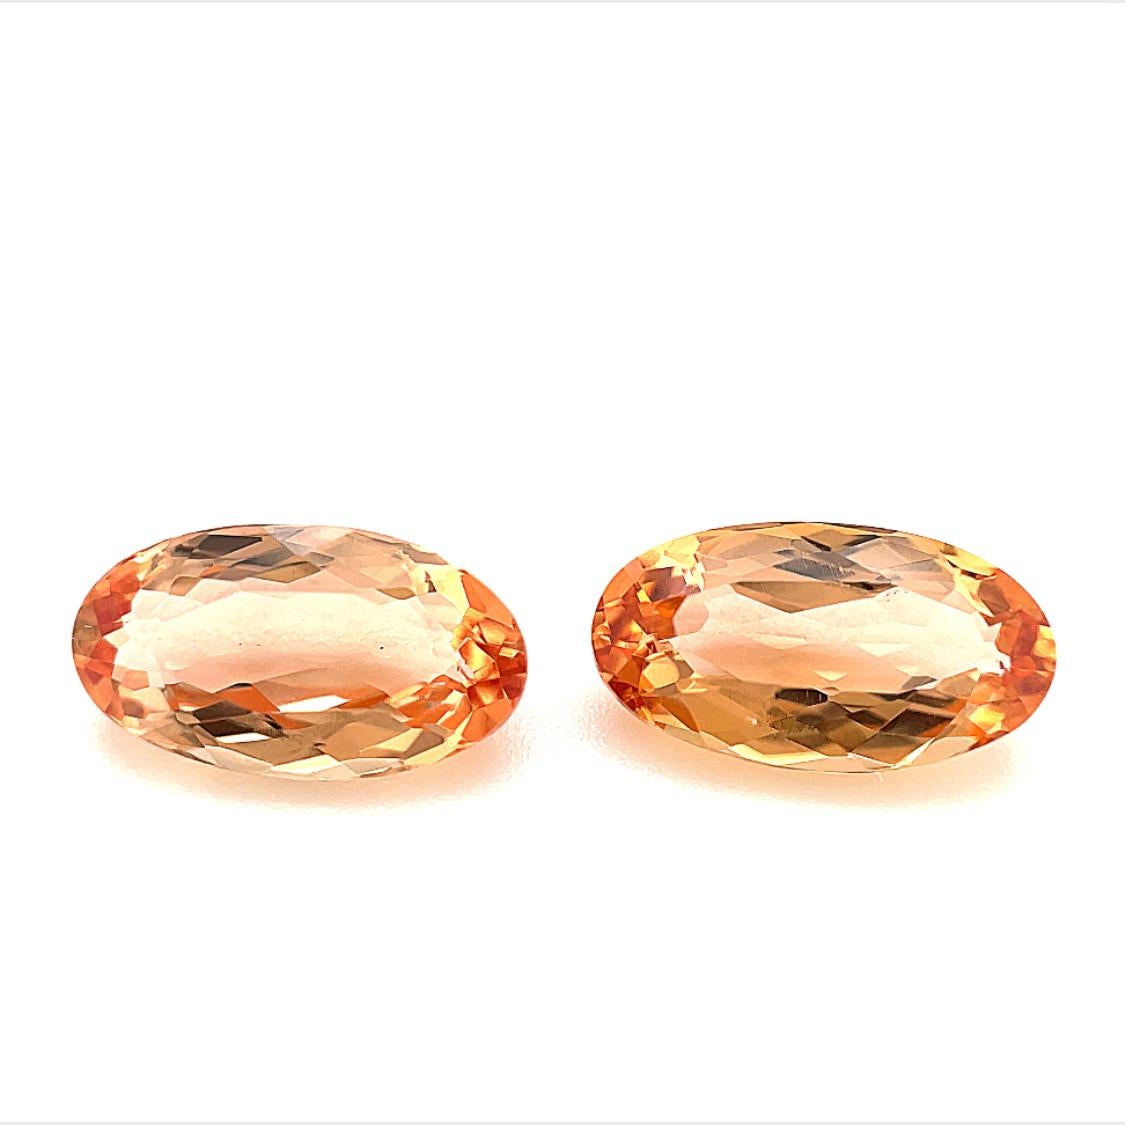 This pair of peachy color imperial topaz would make a stunning pair of earrings, or perhaps a matching ring and pendant! Measuring approximately 10.25 x 5.50mm, they are beautifully cut elongated ovals that have eye-catching sparkle and life. They